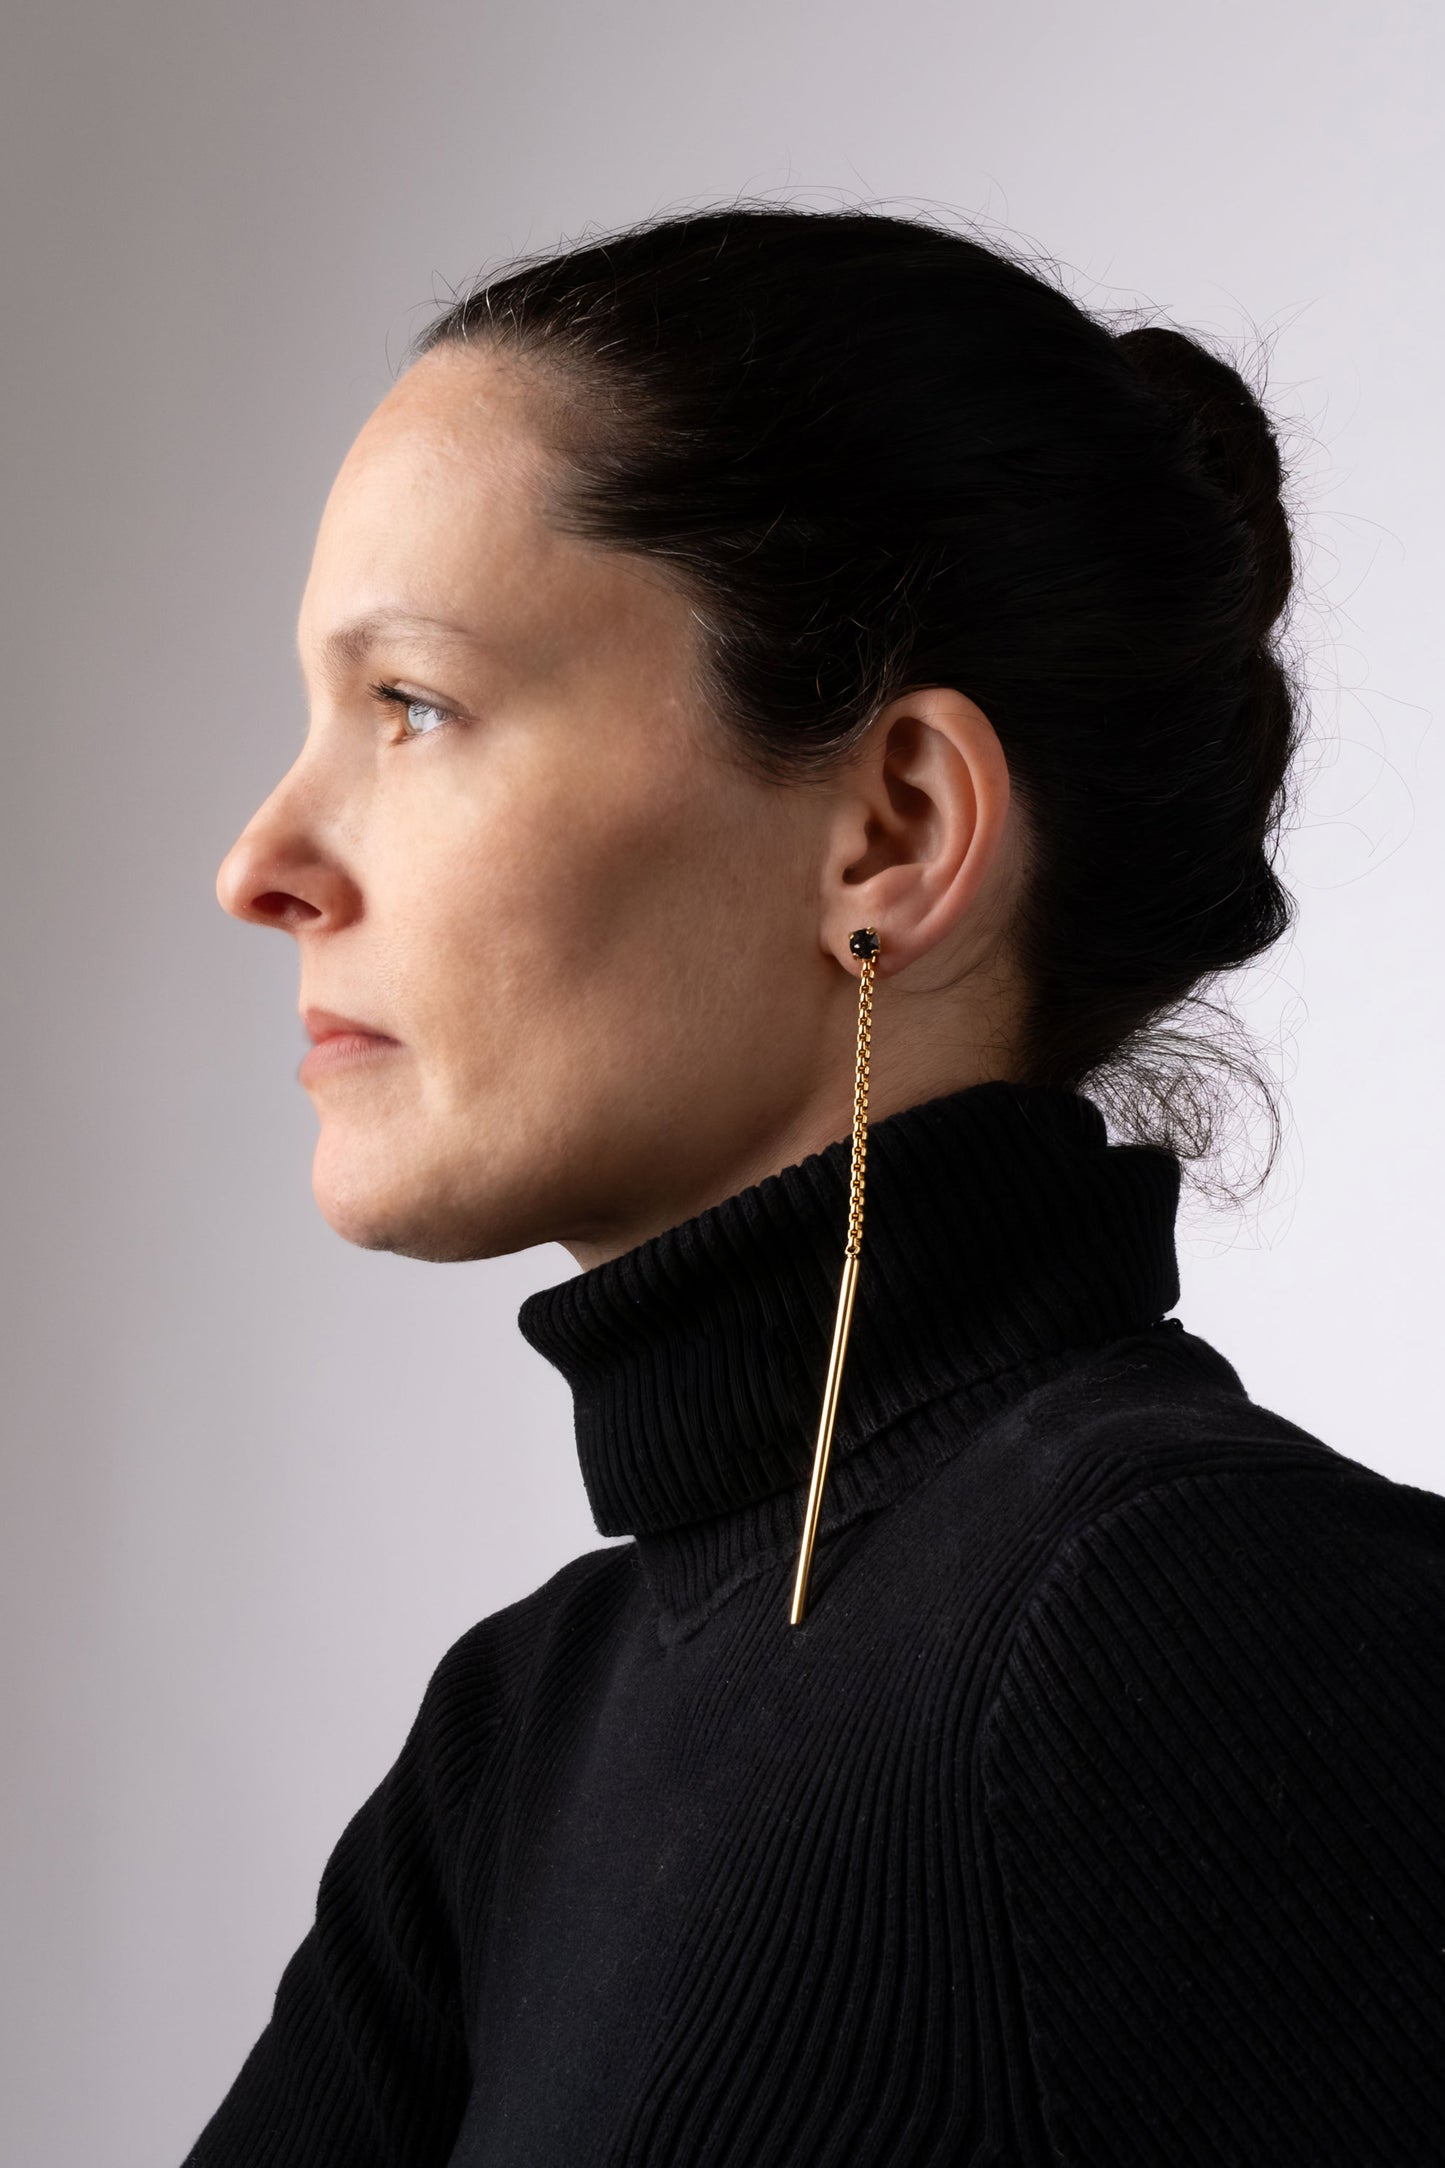 a woman wearing a black turtle neck sweater and gold earrings